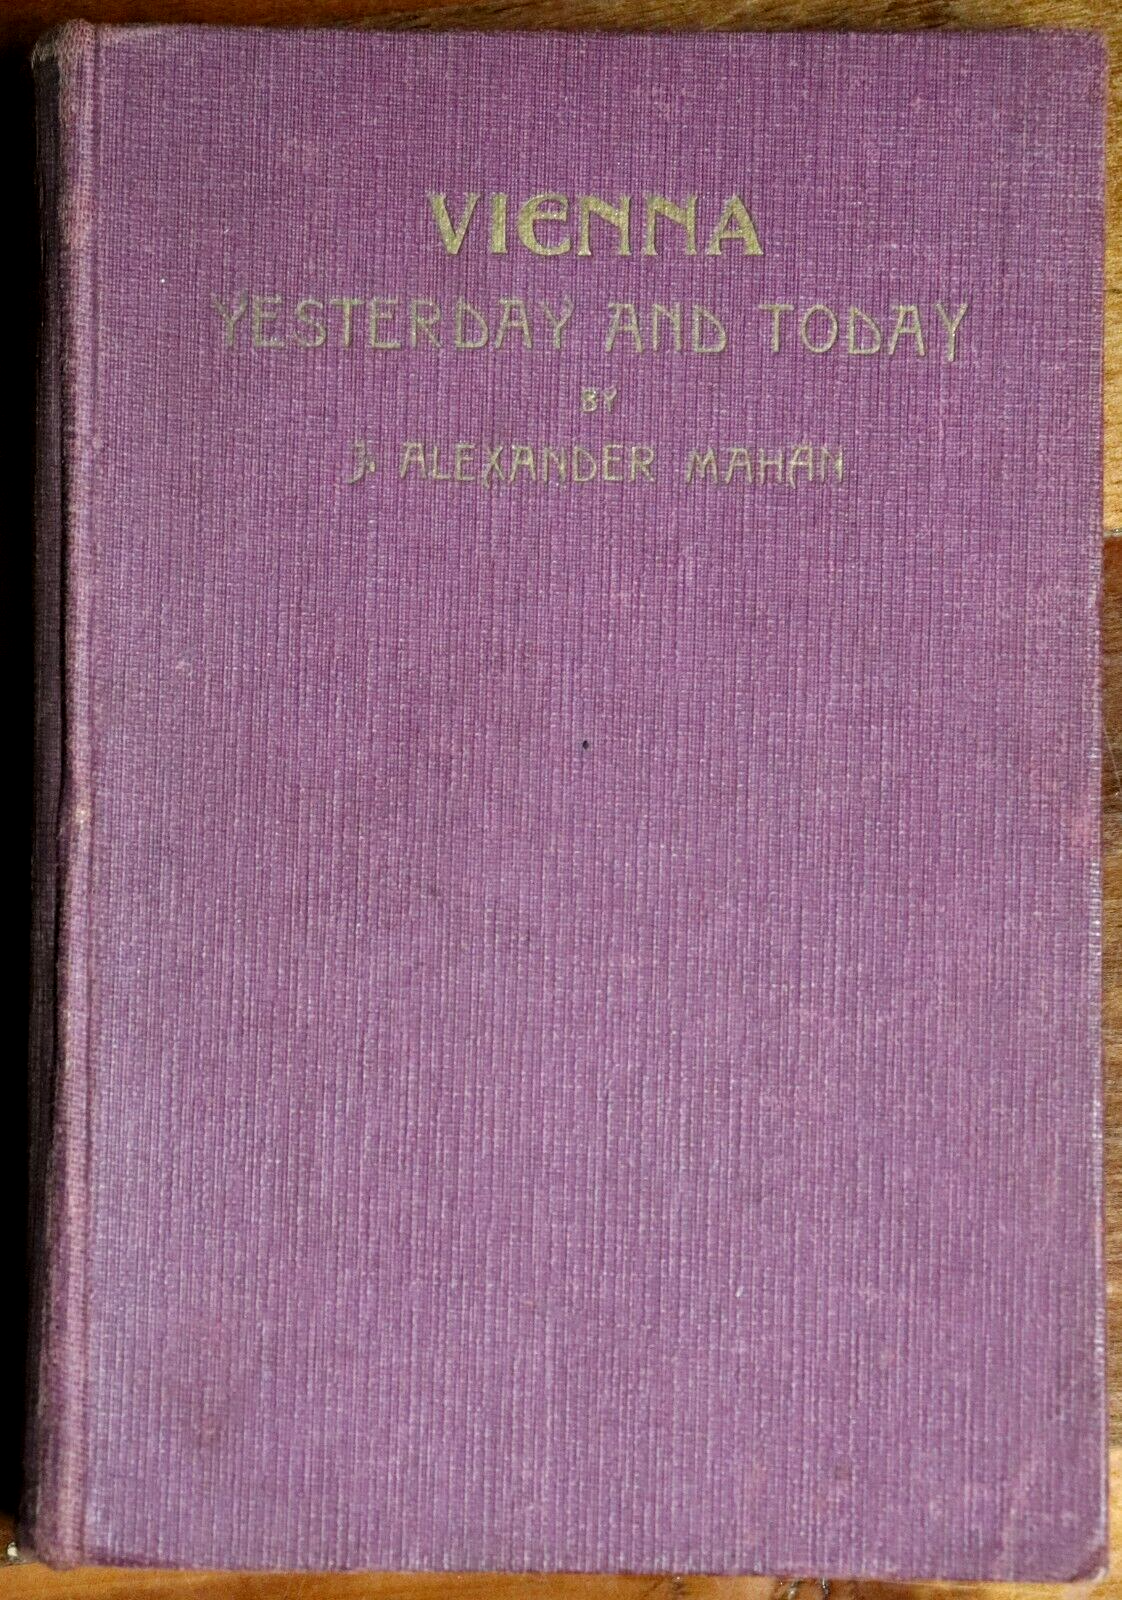 Vienna: Yesterday and Today by JA Mahan - 1933 - Austrian Travel & History Book